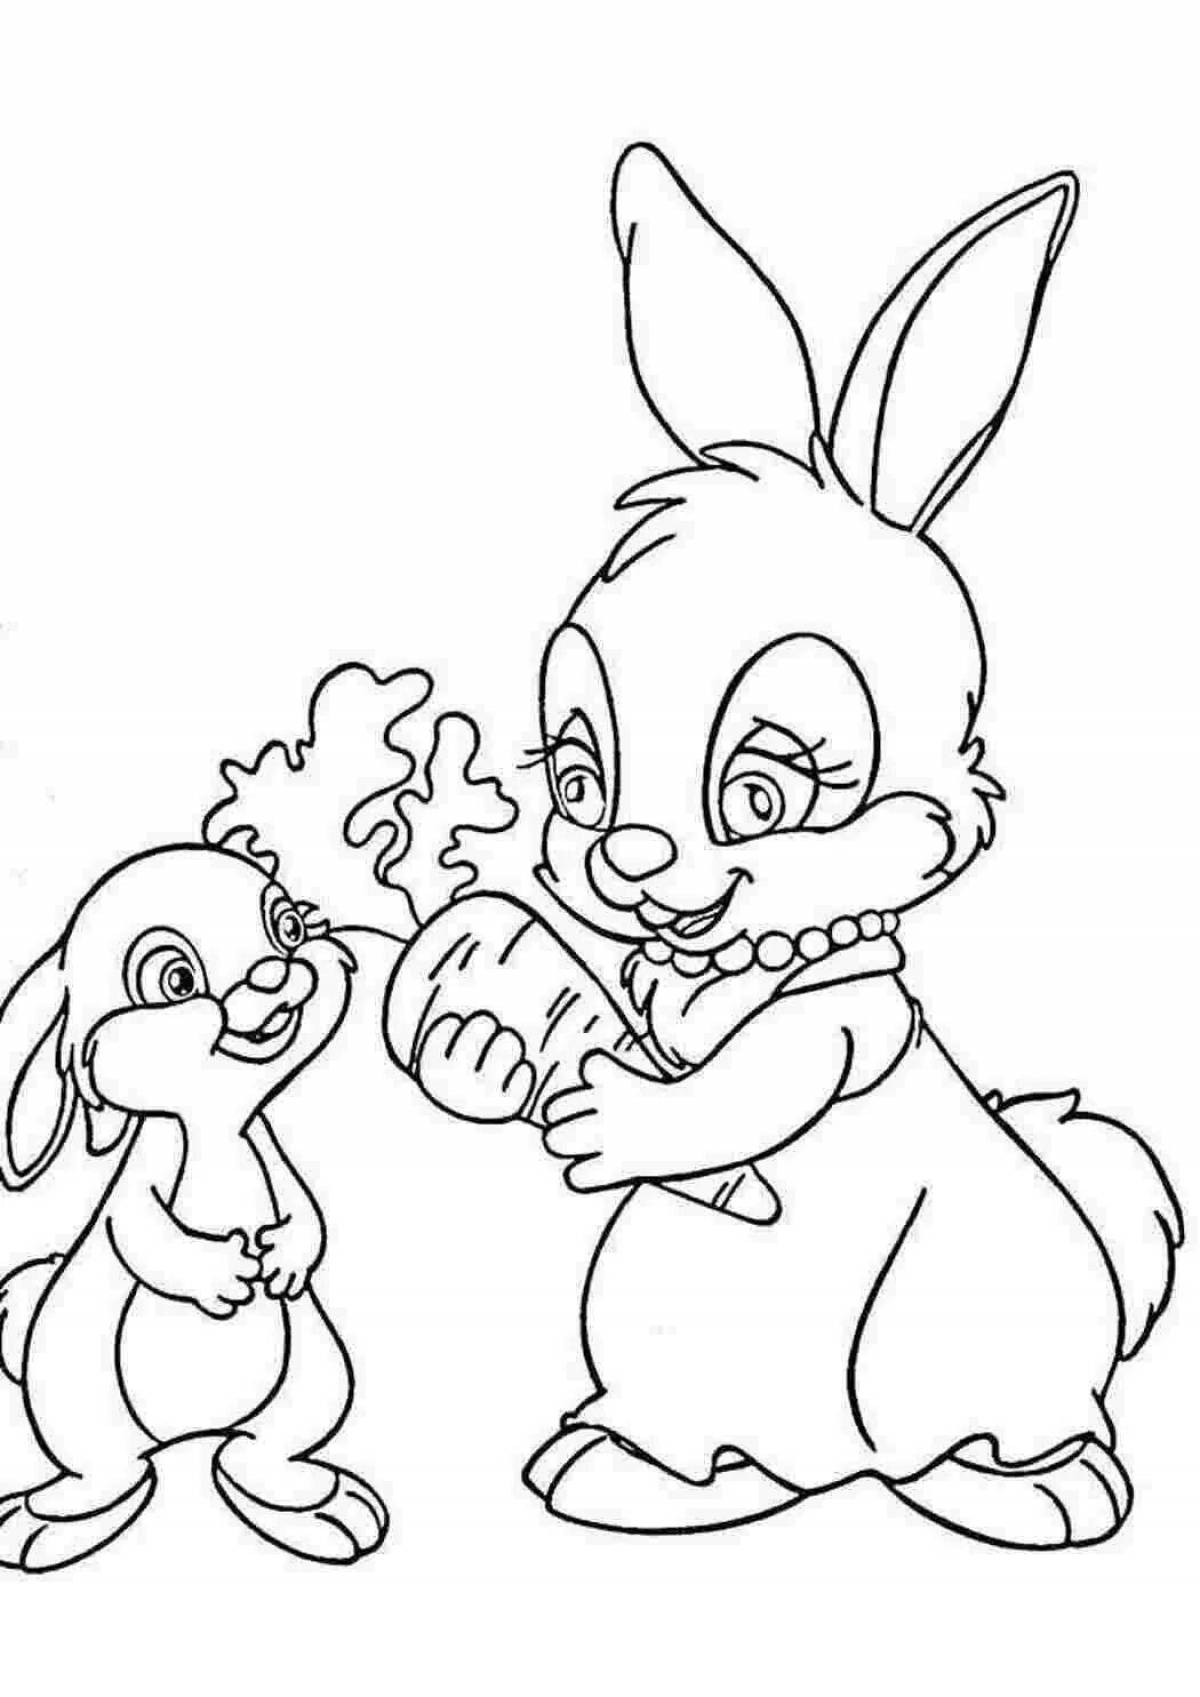 Bright coloring rabbit and squirrel